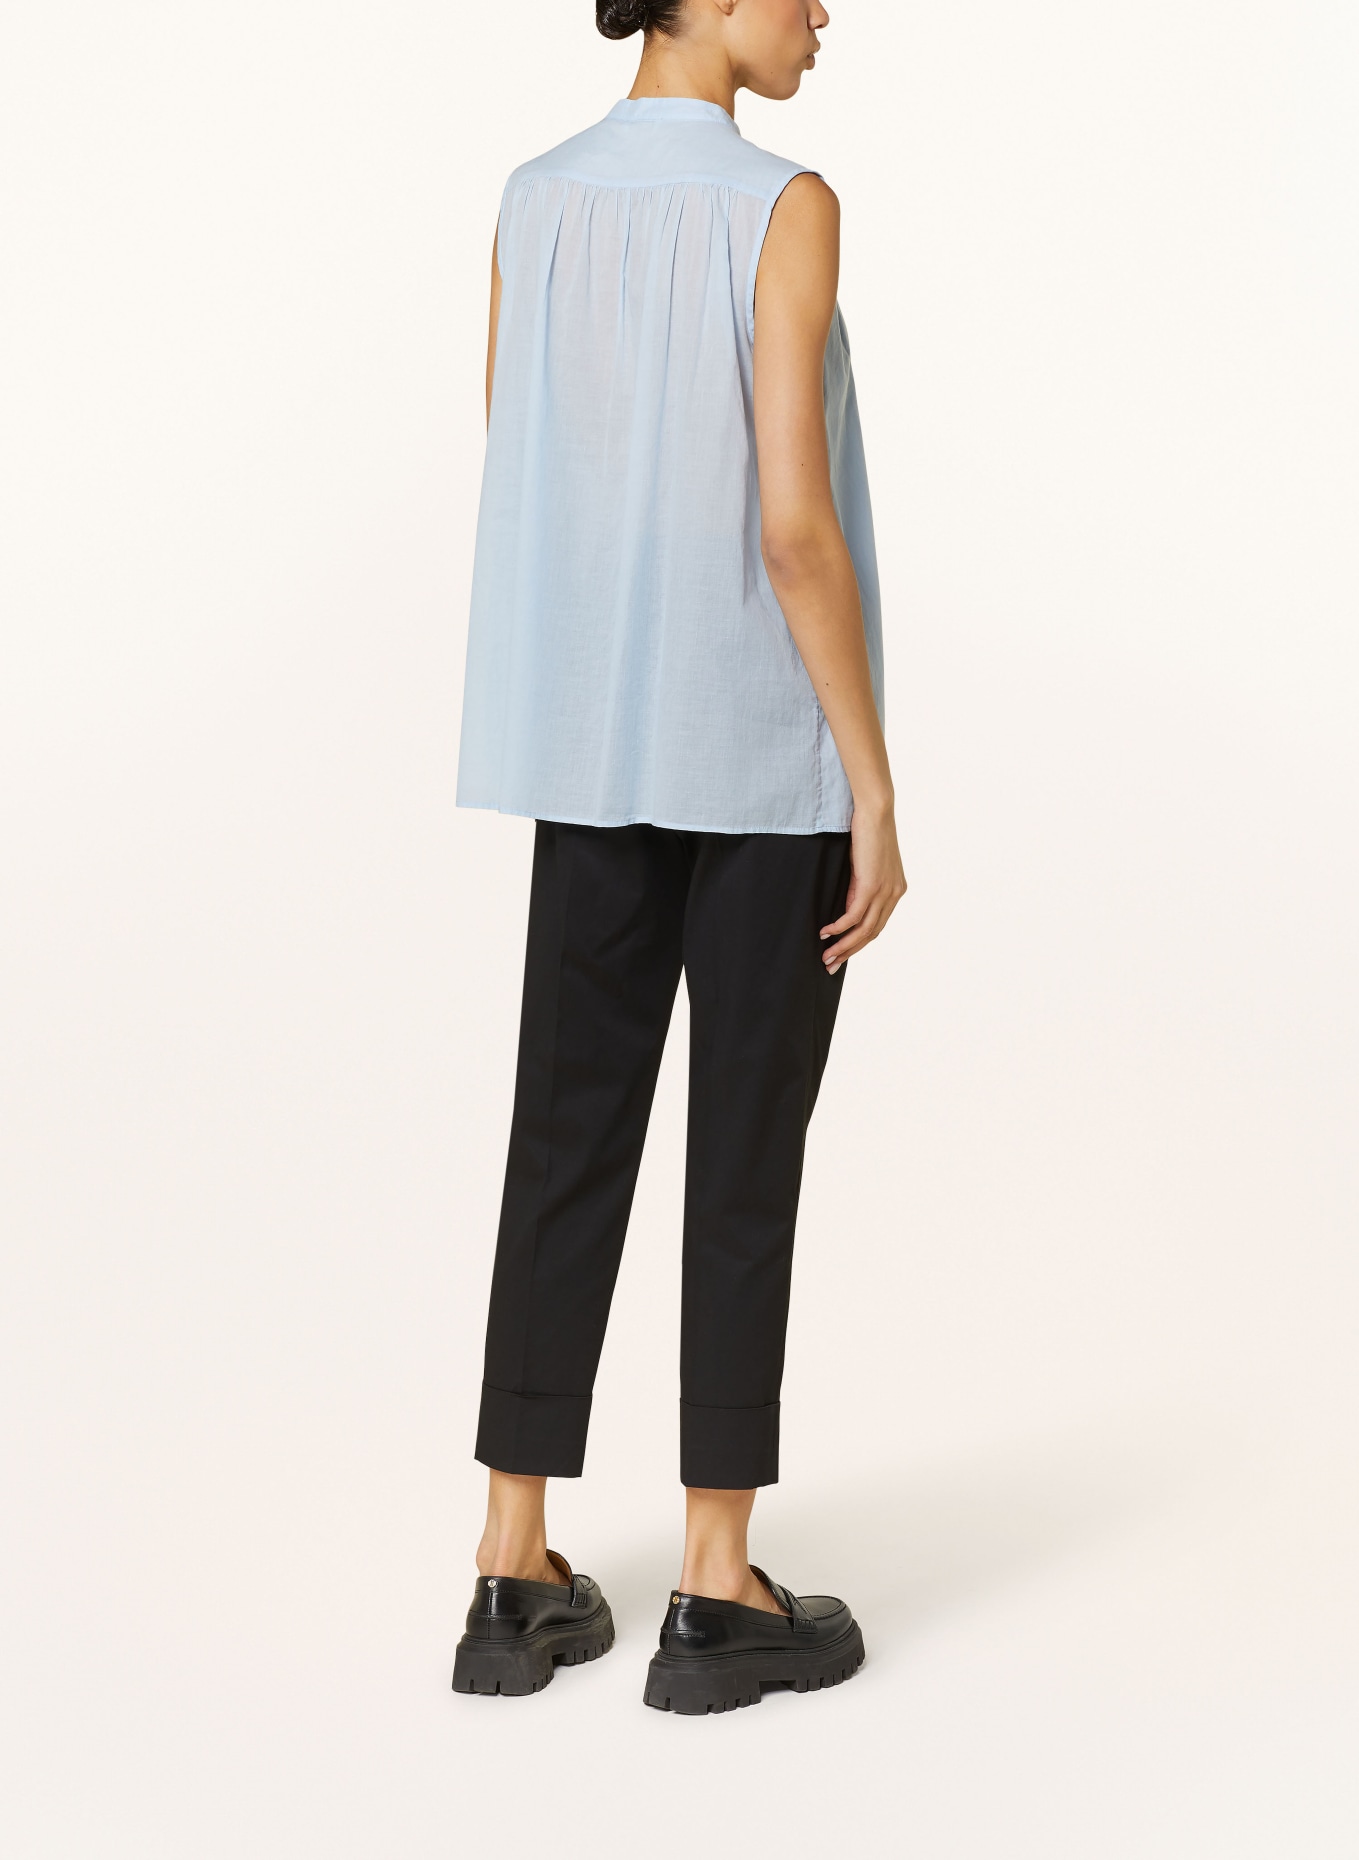 PESERICO Blouse top, Color: LIGHT BLUE (Image 3)